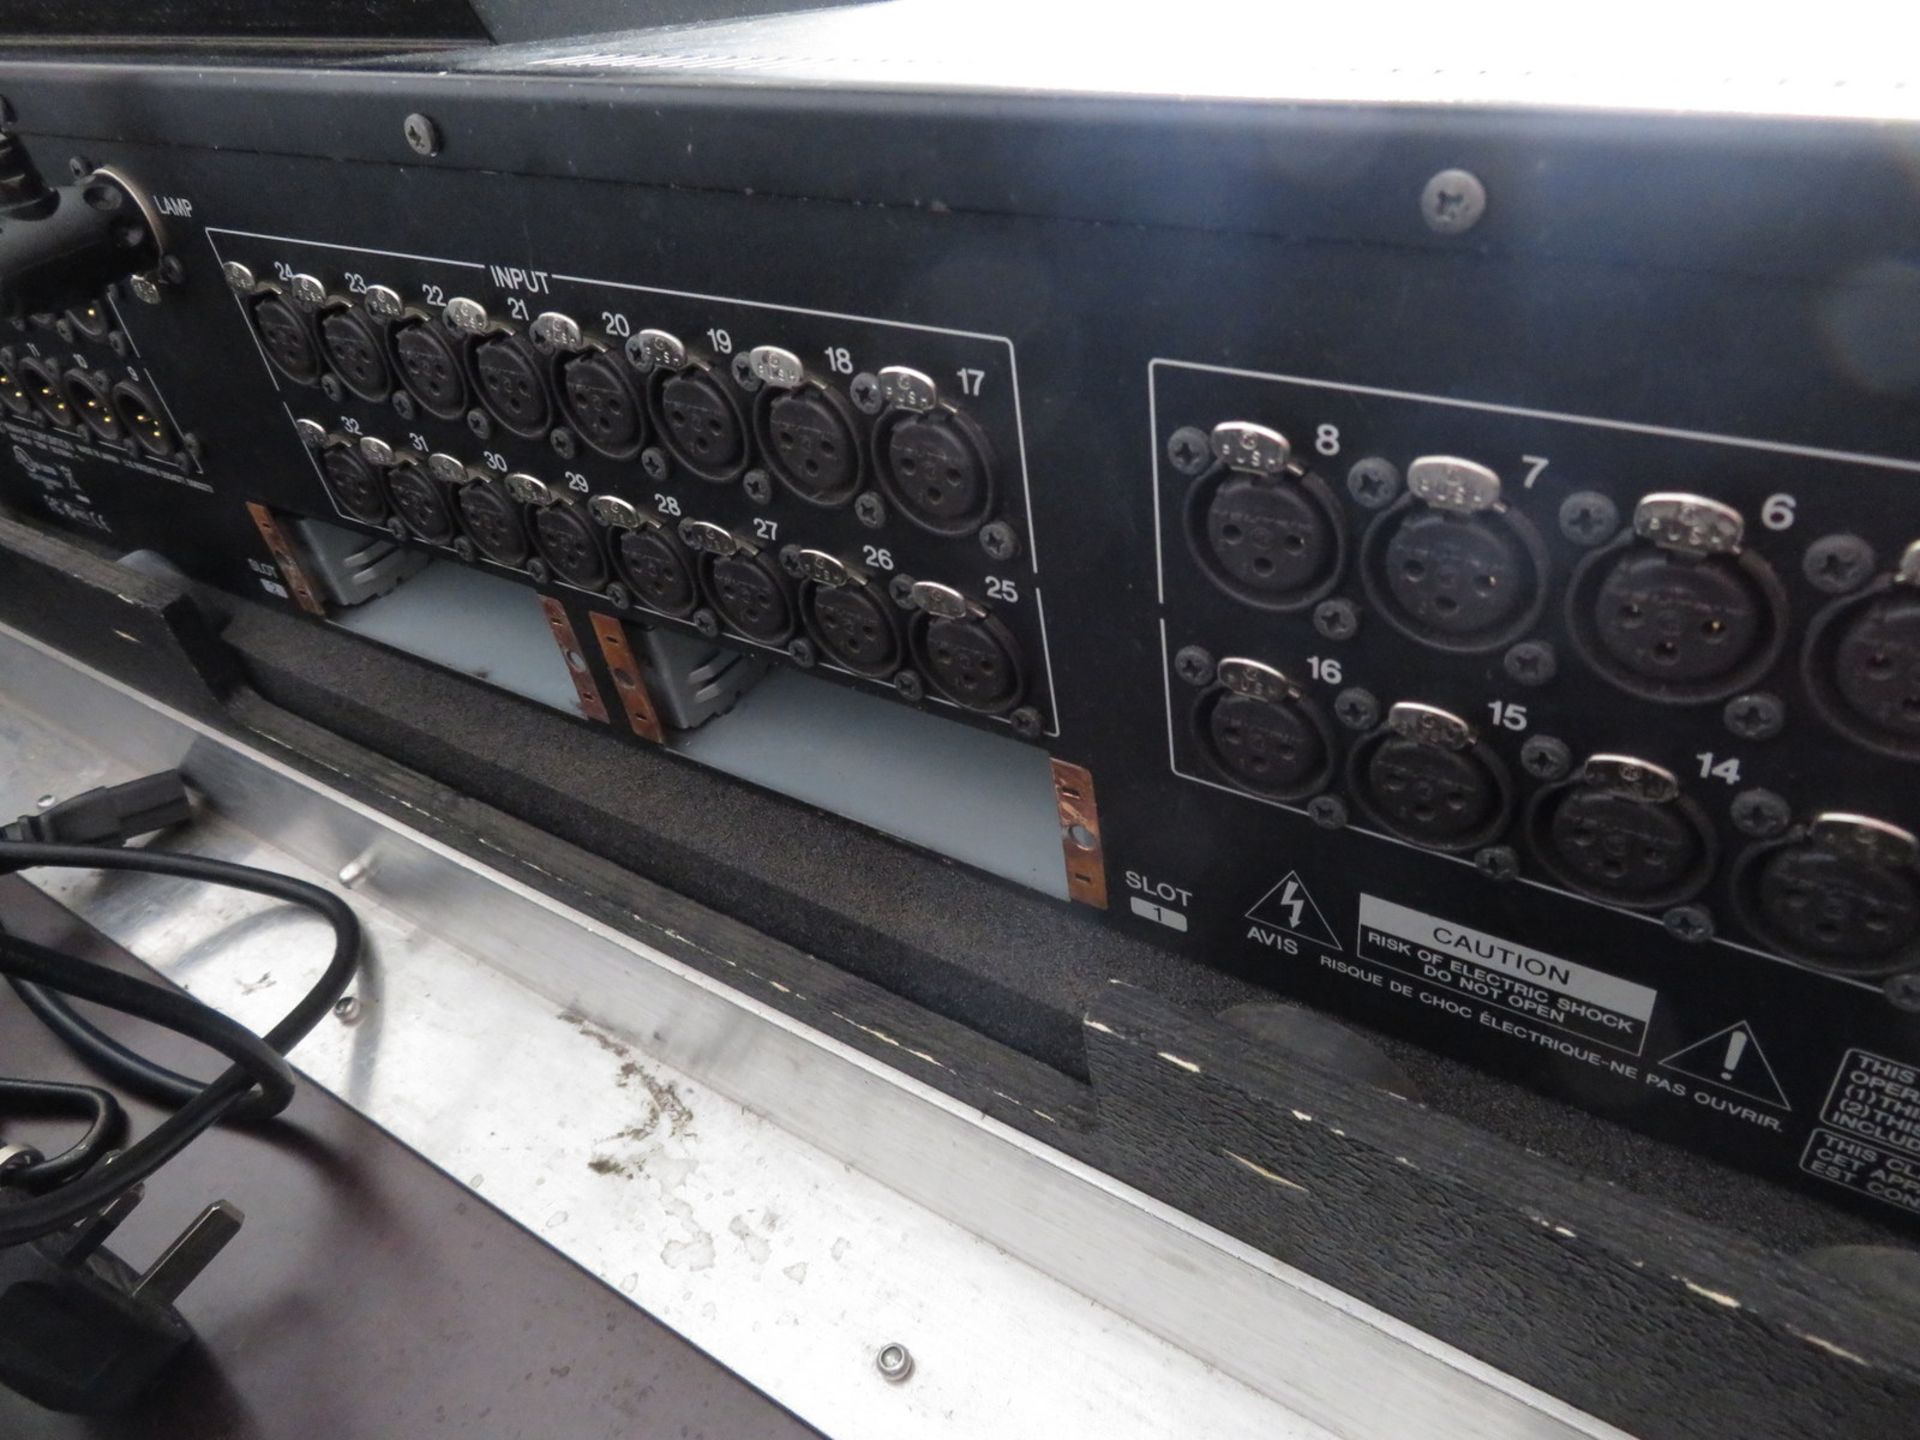 Yamaha LS9-32 Digital mixing console/sound desk with flightcase. Working condition. - Image 10 of 12